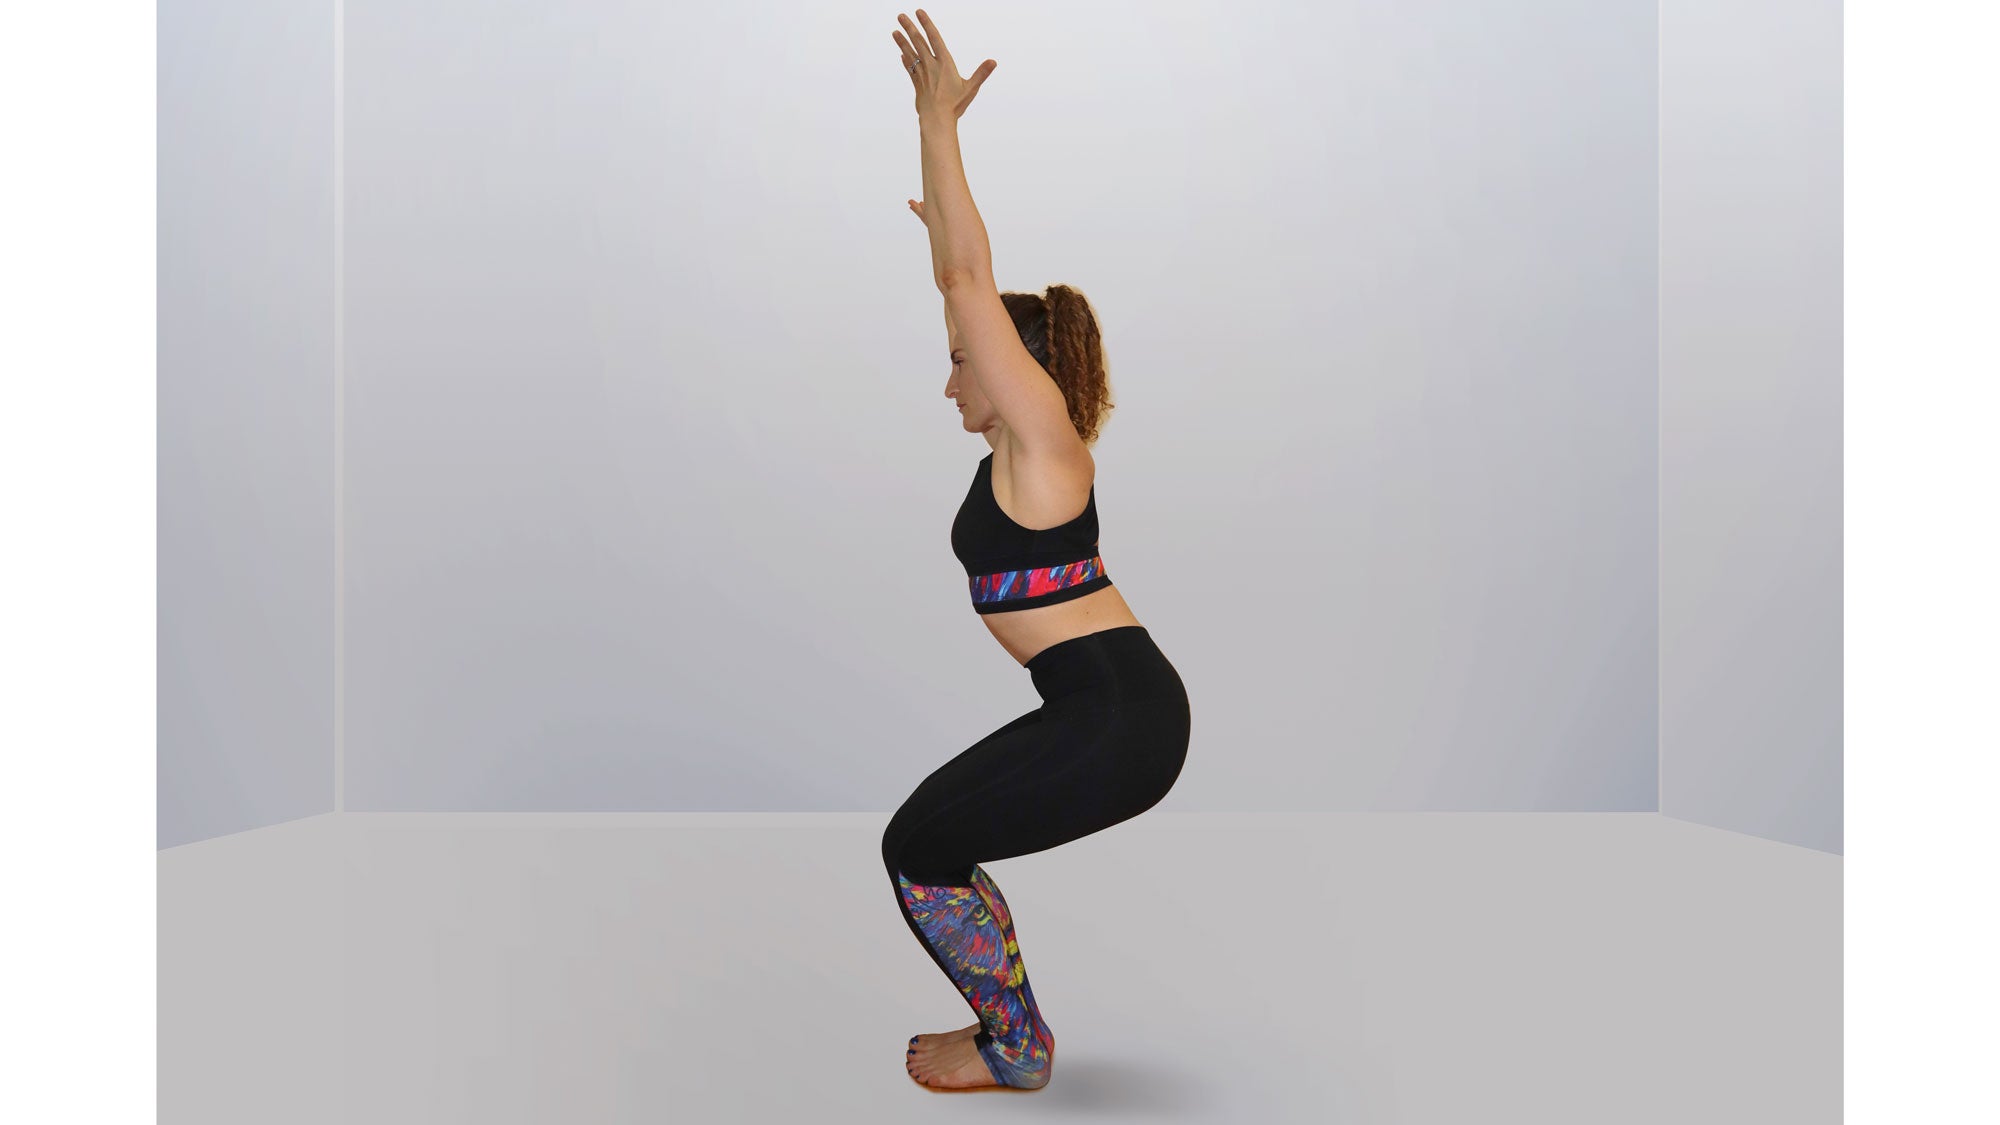 What are some yoga poses for Vata, Pitta and Kapha body types? - Quora